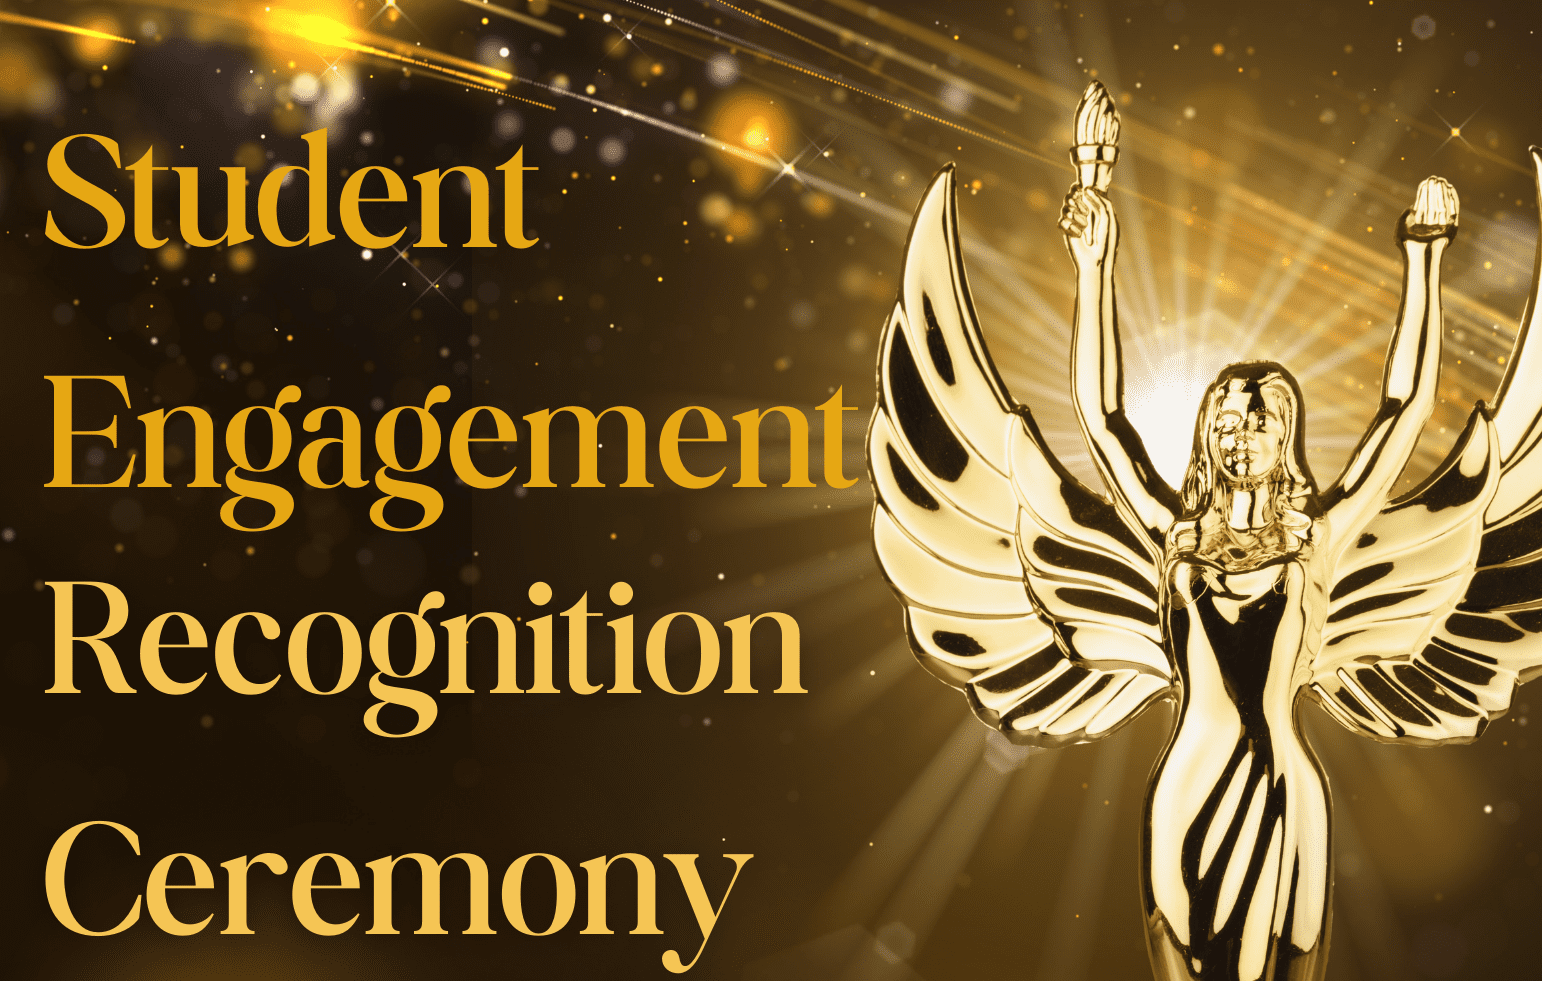 Student Engagement Recognition Ceremony